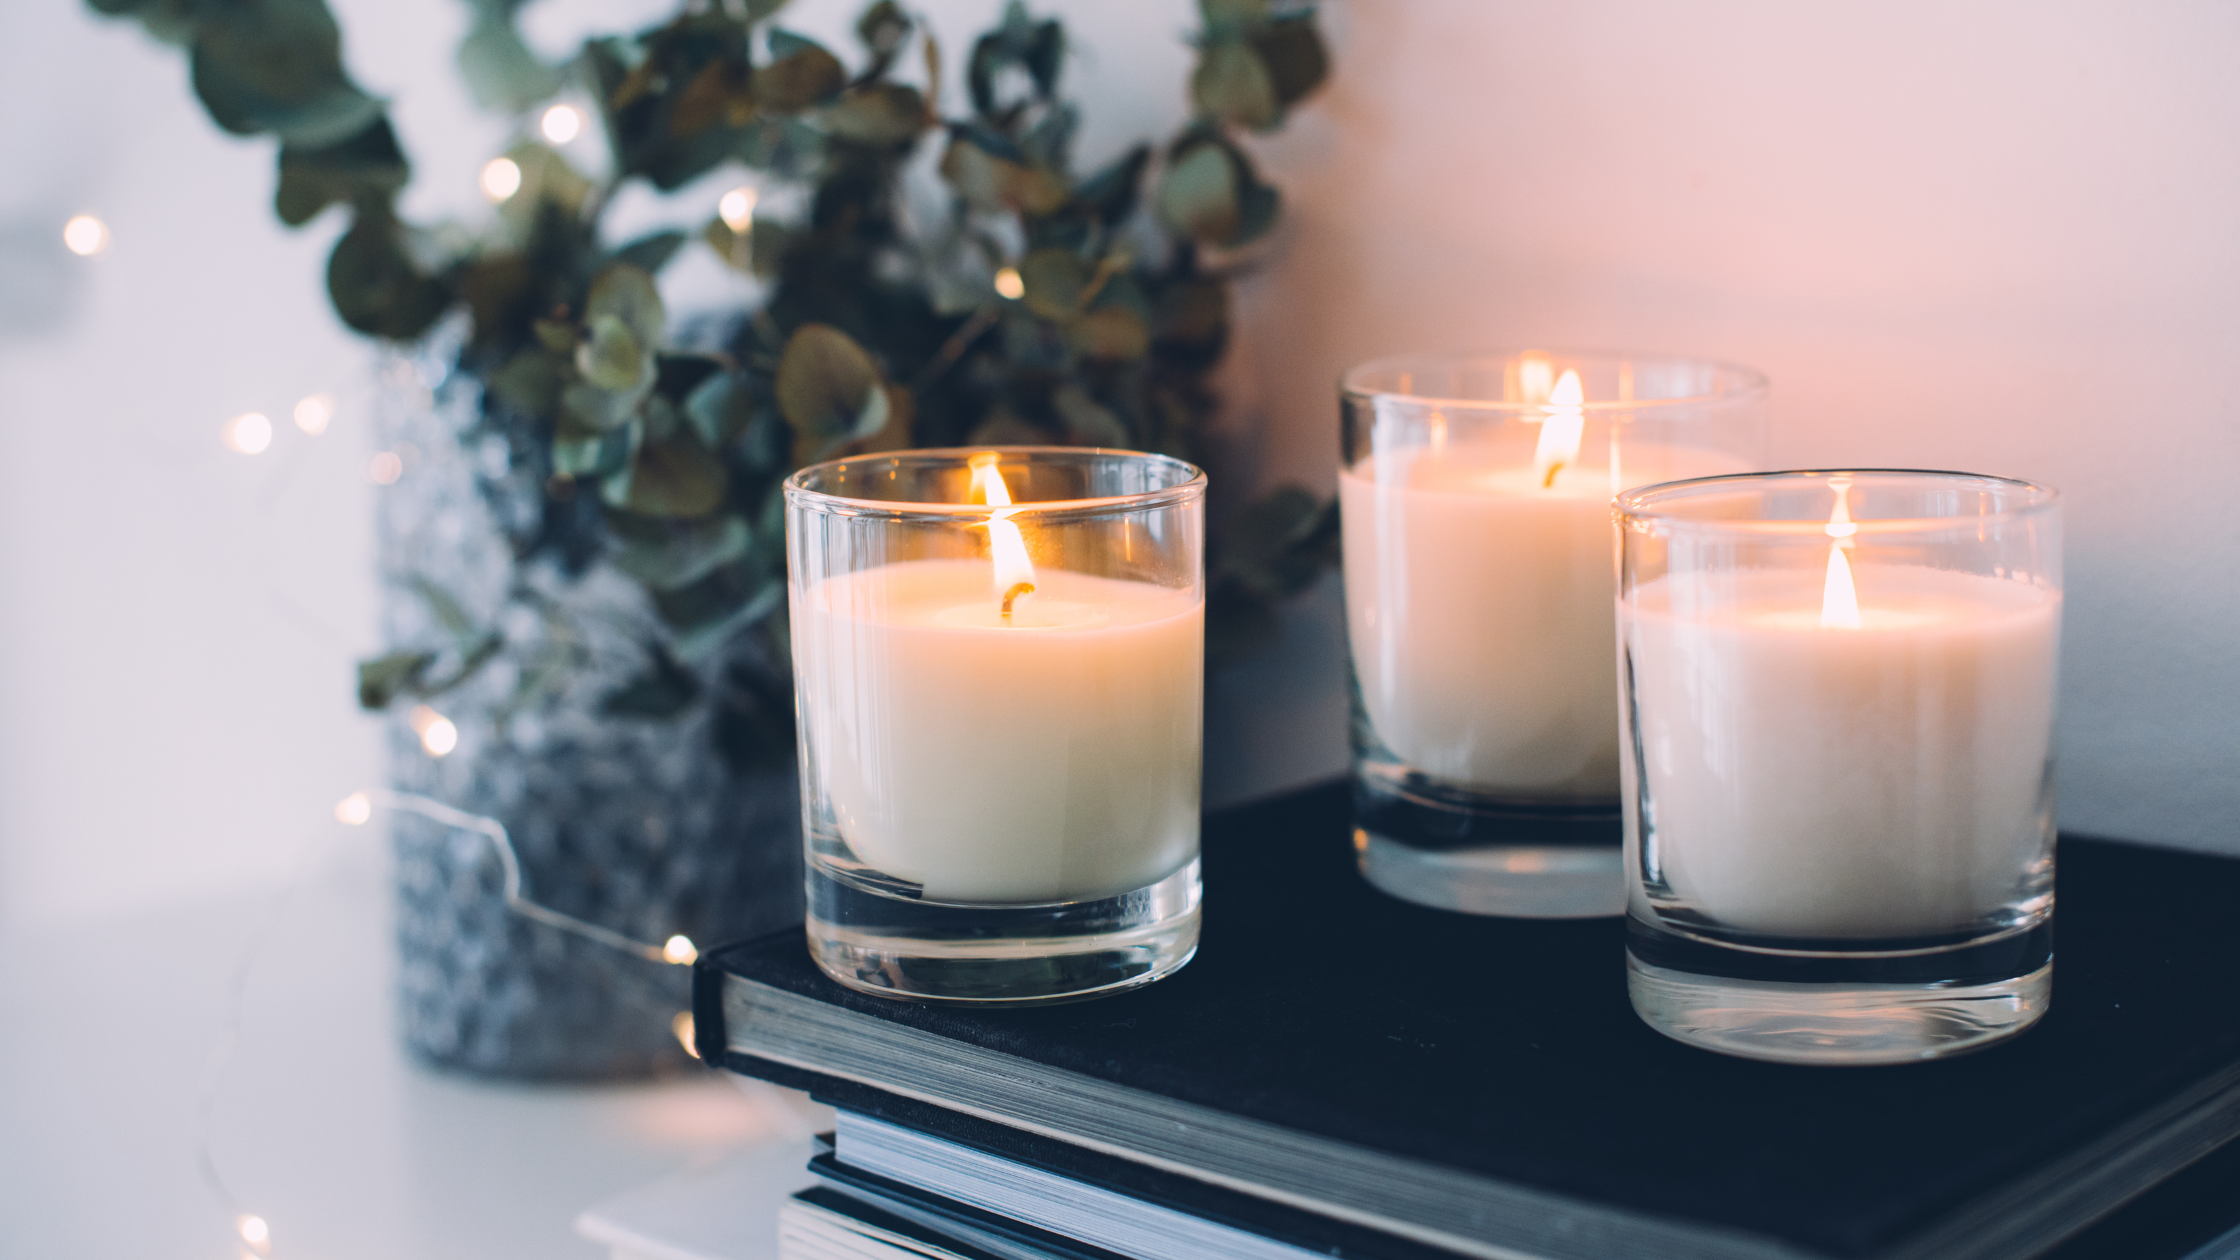 VEGAN AND CLEAN BURNING CANDLES